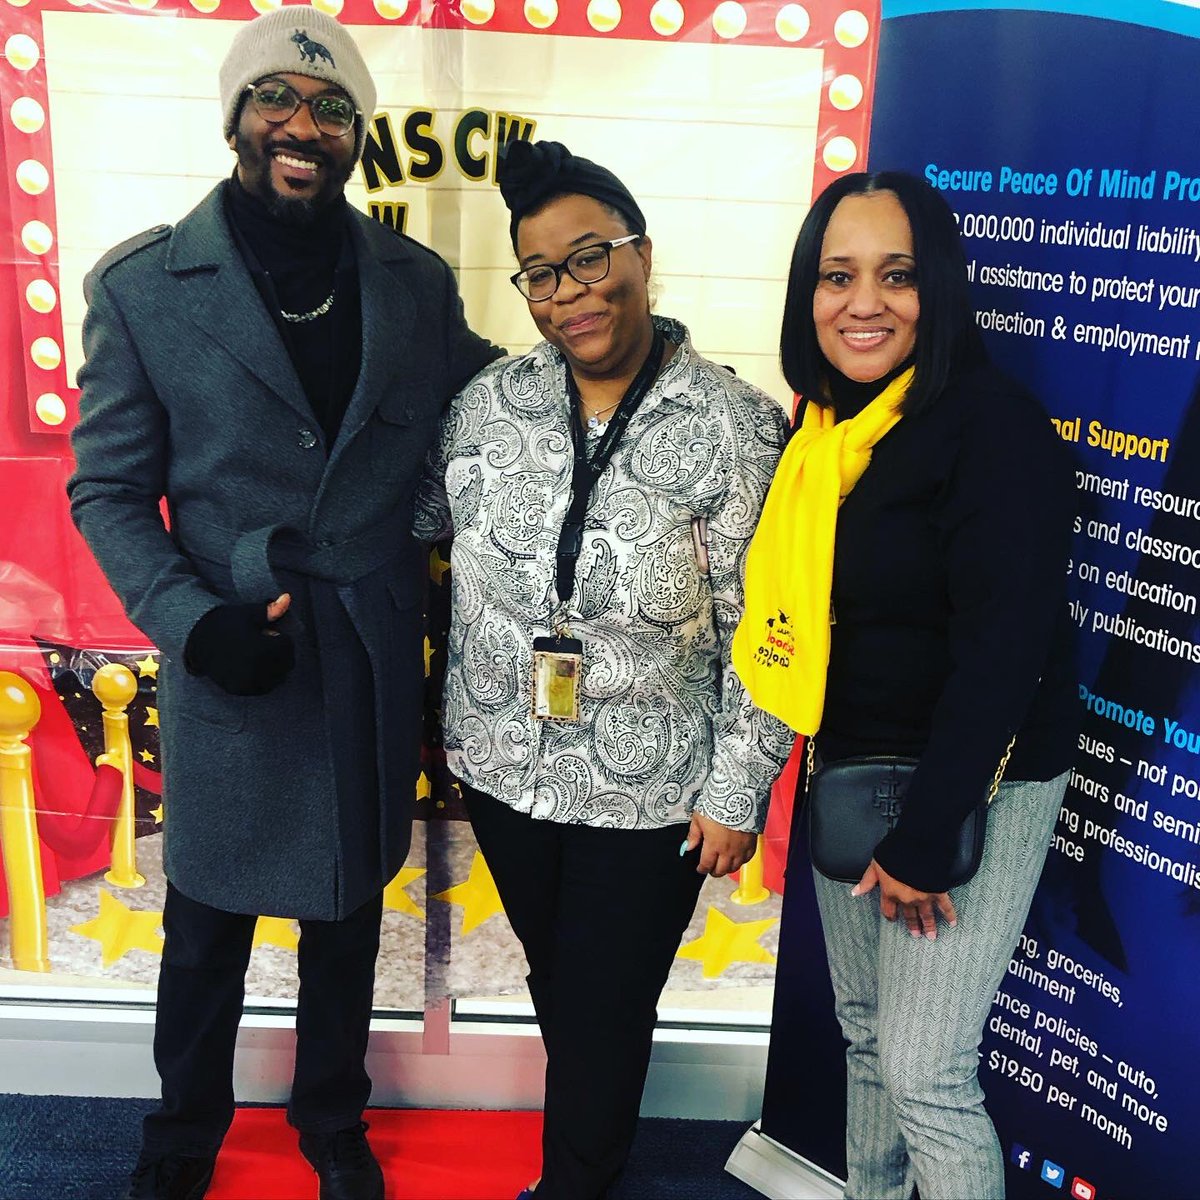 We do this work for parents, students and teachers. 

What a way to kick off National School Choice Week with my sisters 👯‍♀️. 

We’ve collaborated over the last couple of years (7) organizing for better educational outcomes for all kids. 

#ProfessorJBA #NSCW #organizer #teacher